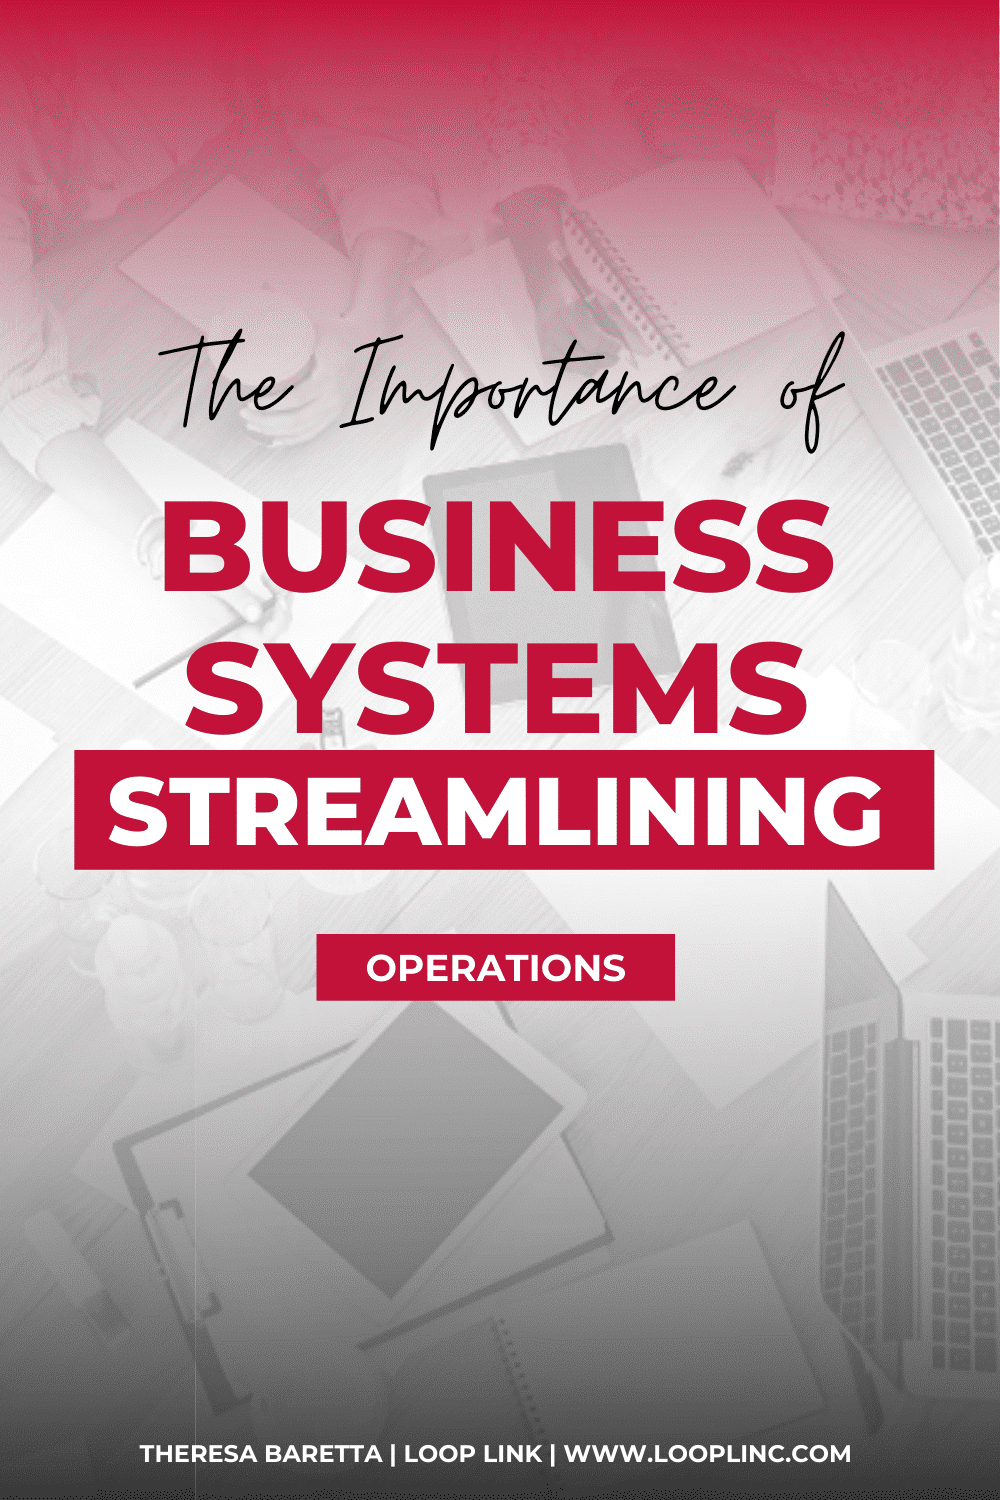 Why Business Systems Are Important for Streamlining